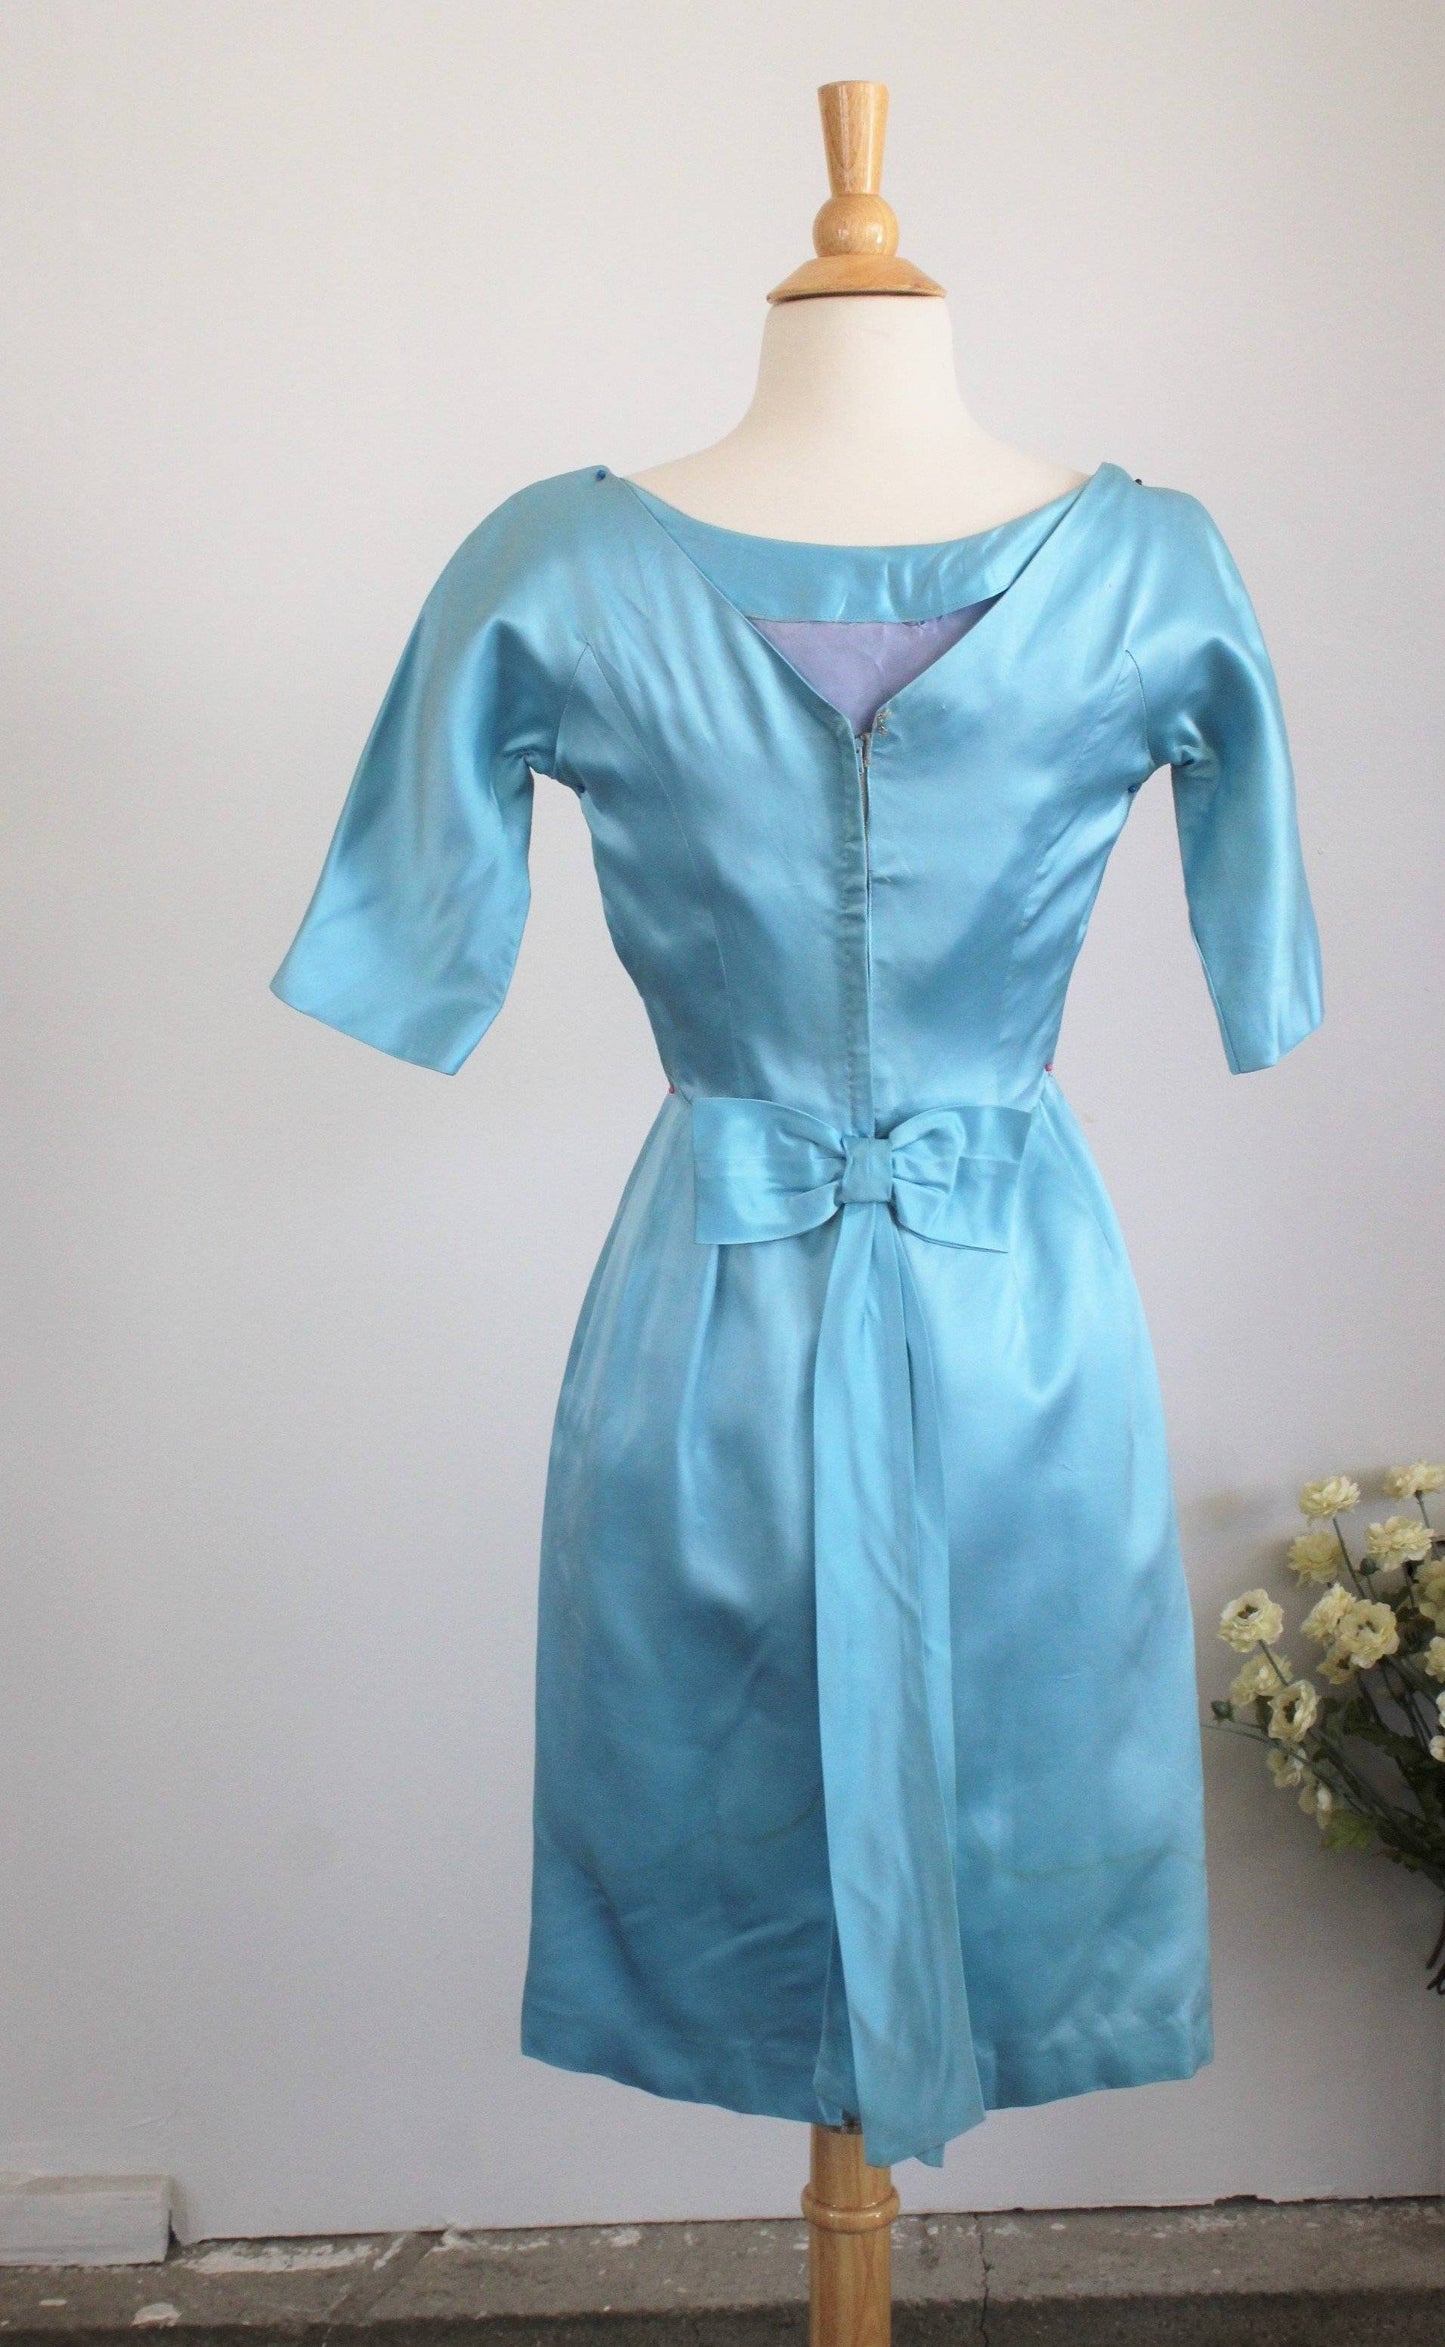 Vintage 1950s Satin Wiggle Cocktail Dress With Bow-Toadstool Farm Vintage-1950s Cocktail Dress,1950s Dress,50s Dress,Blue Dress,Dress With Bow,Metal Zipper,Satin Dress,Vintage,Vintage Clothing,Vintage Dress,Vintage Dresses,Wiggle Dress